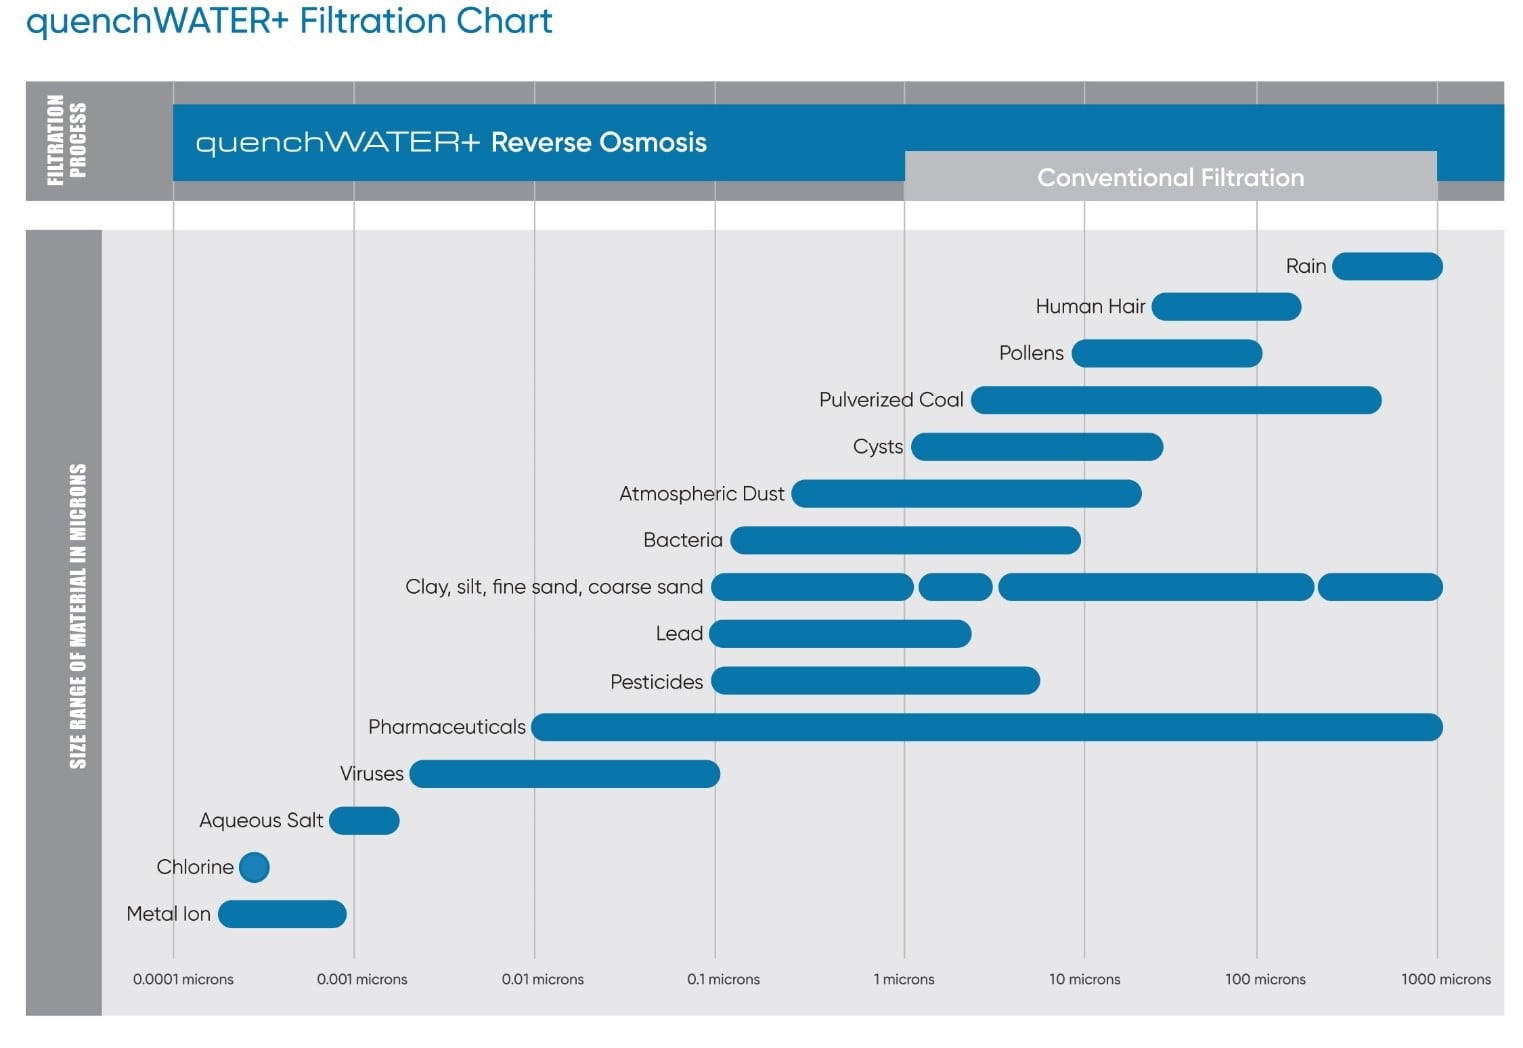 quenchWATER+ filtration chart